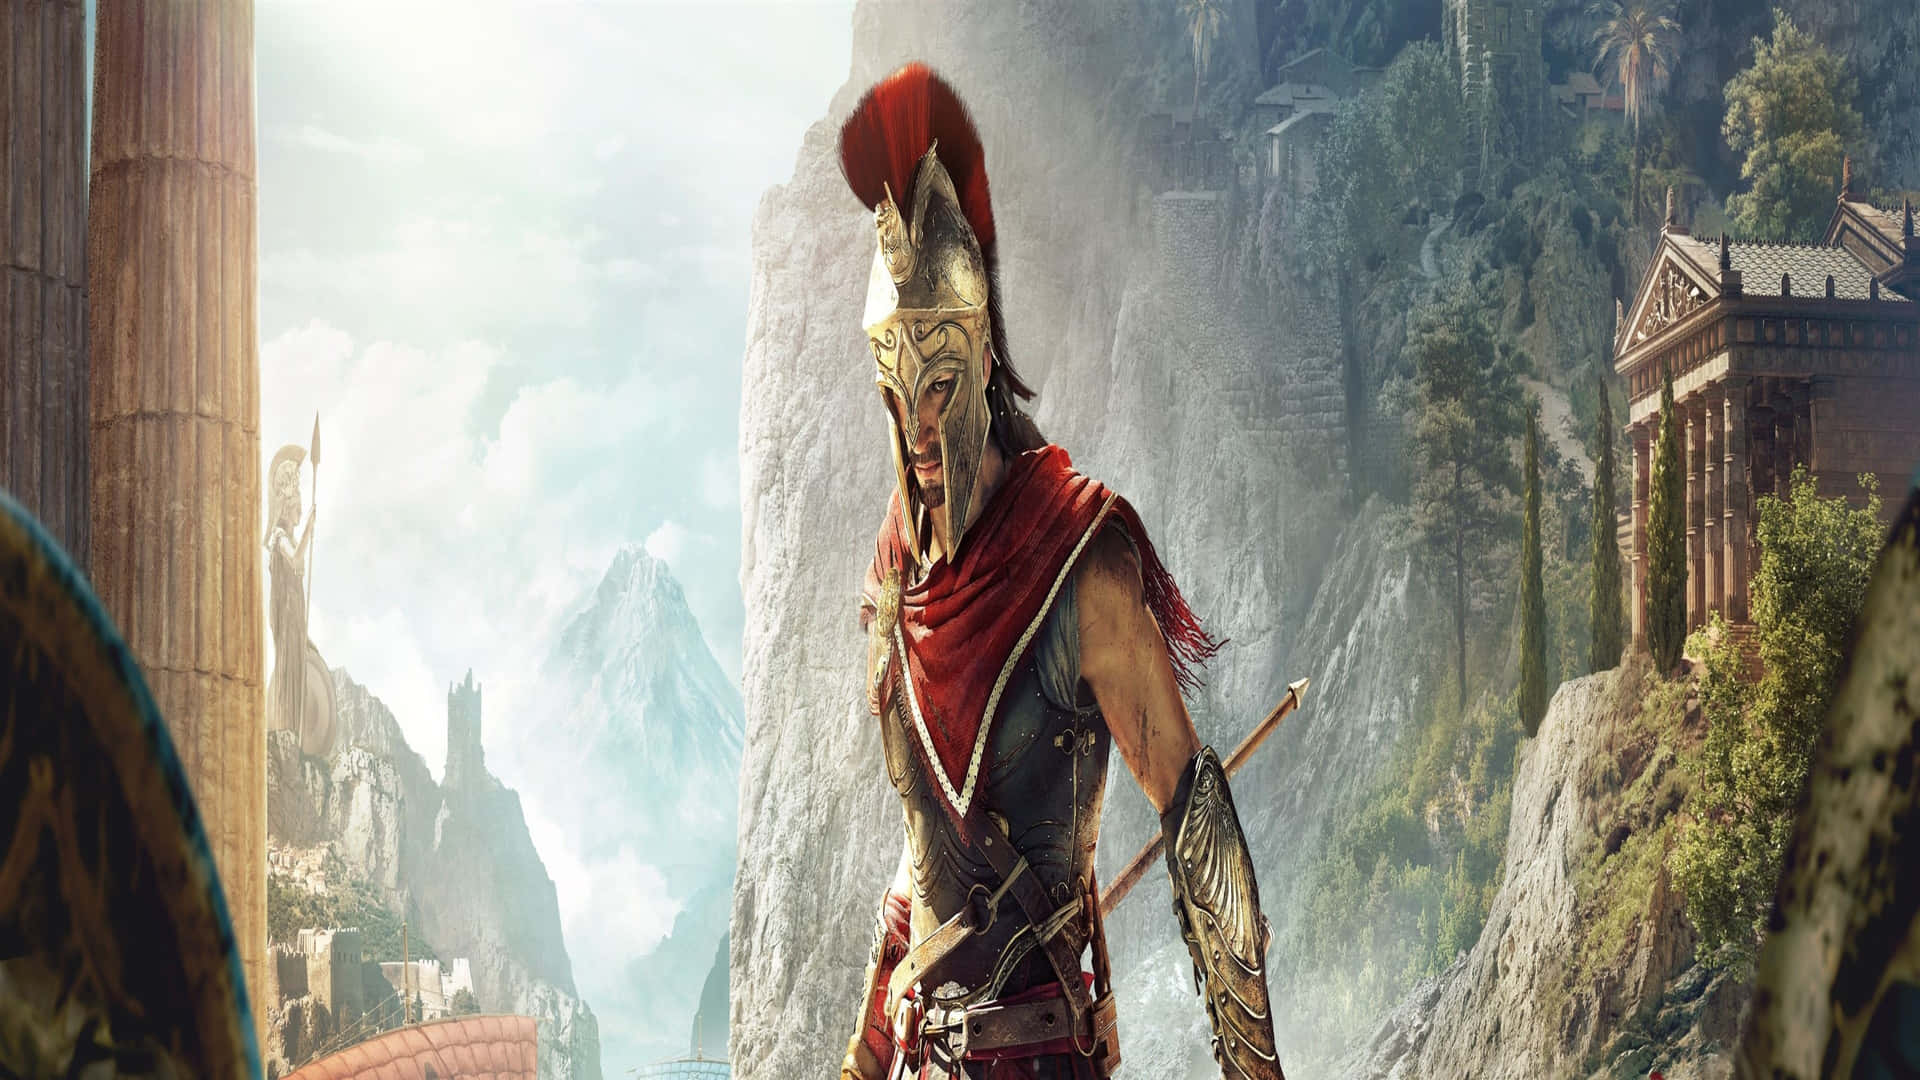 Engage in Epic Adventures and Settling Ancient Grievances in 4K Assassin's Creed Odyssey